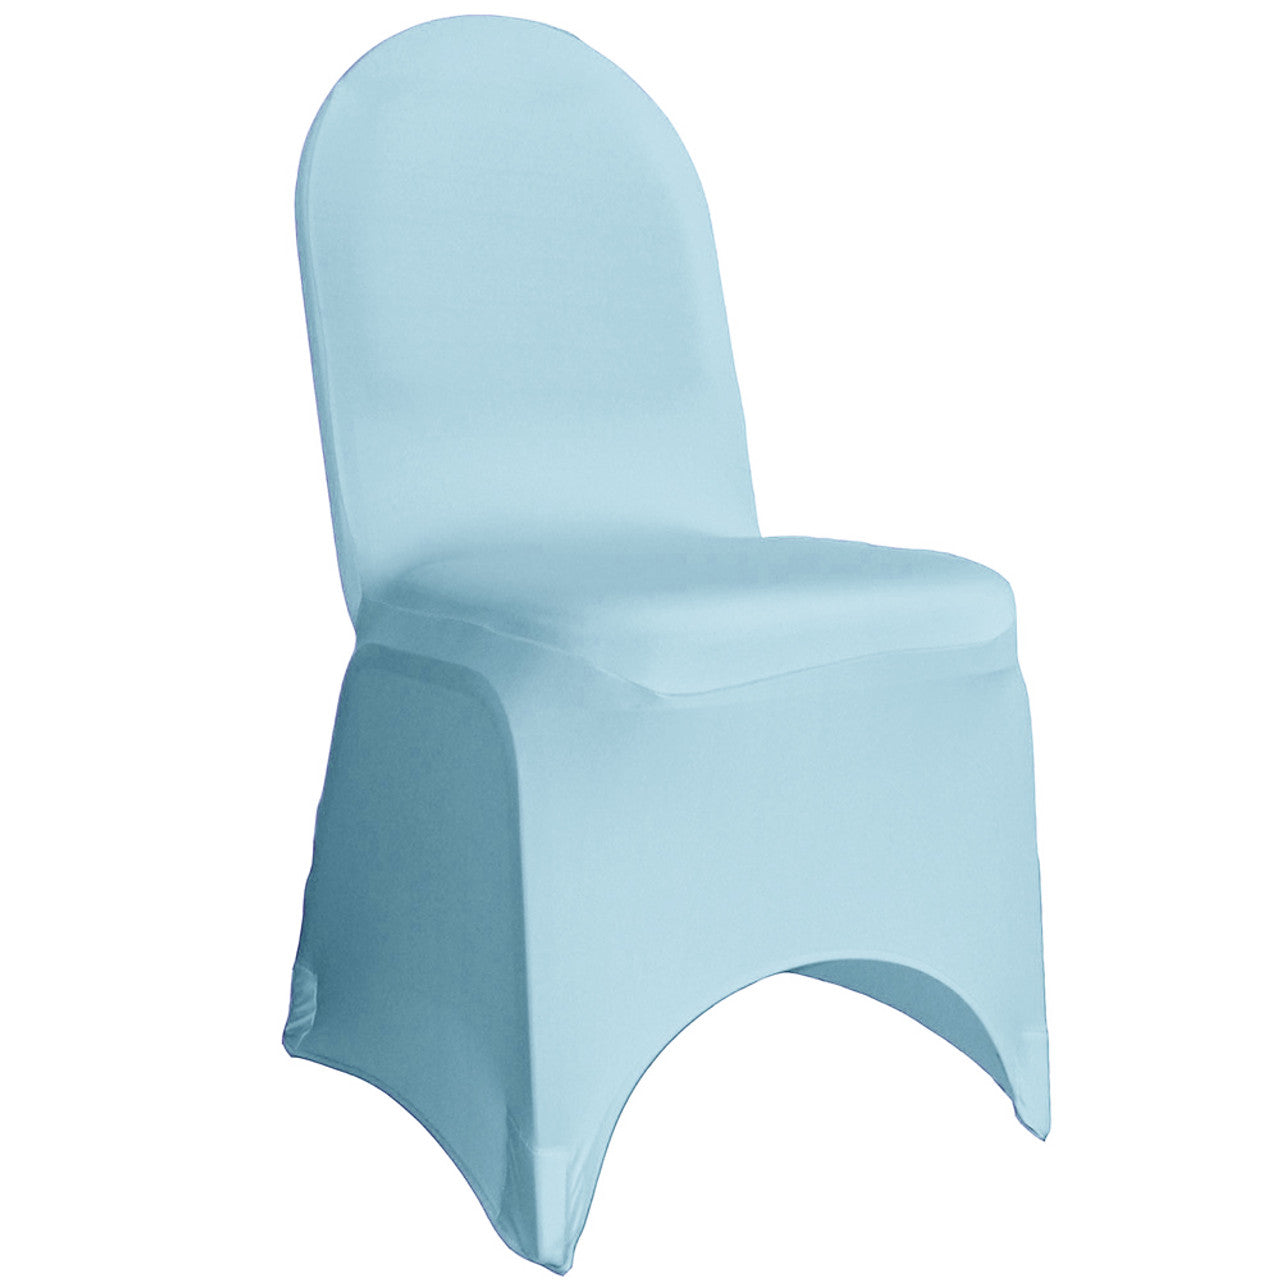 Spandex Banquet Chair Cover in Light Blue